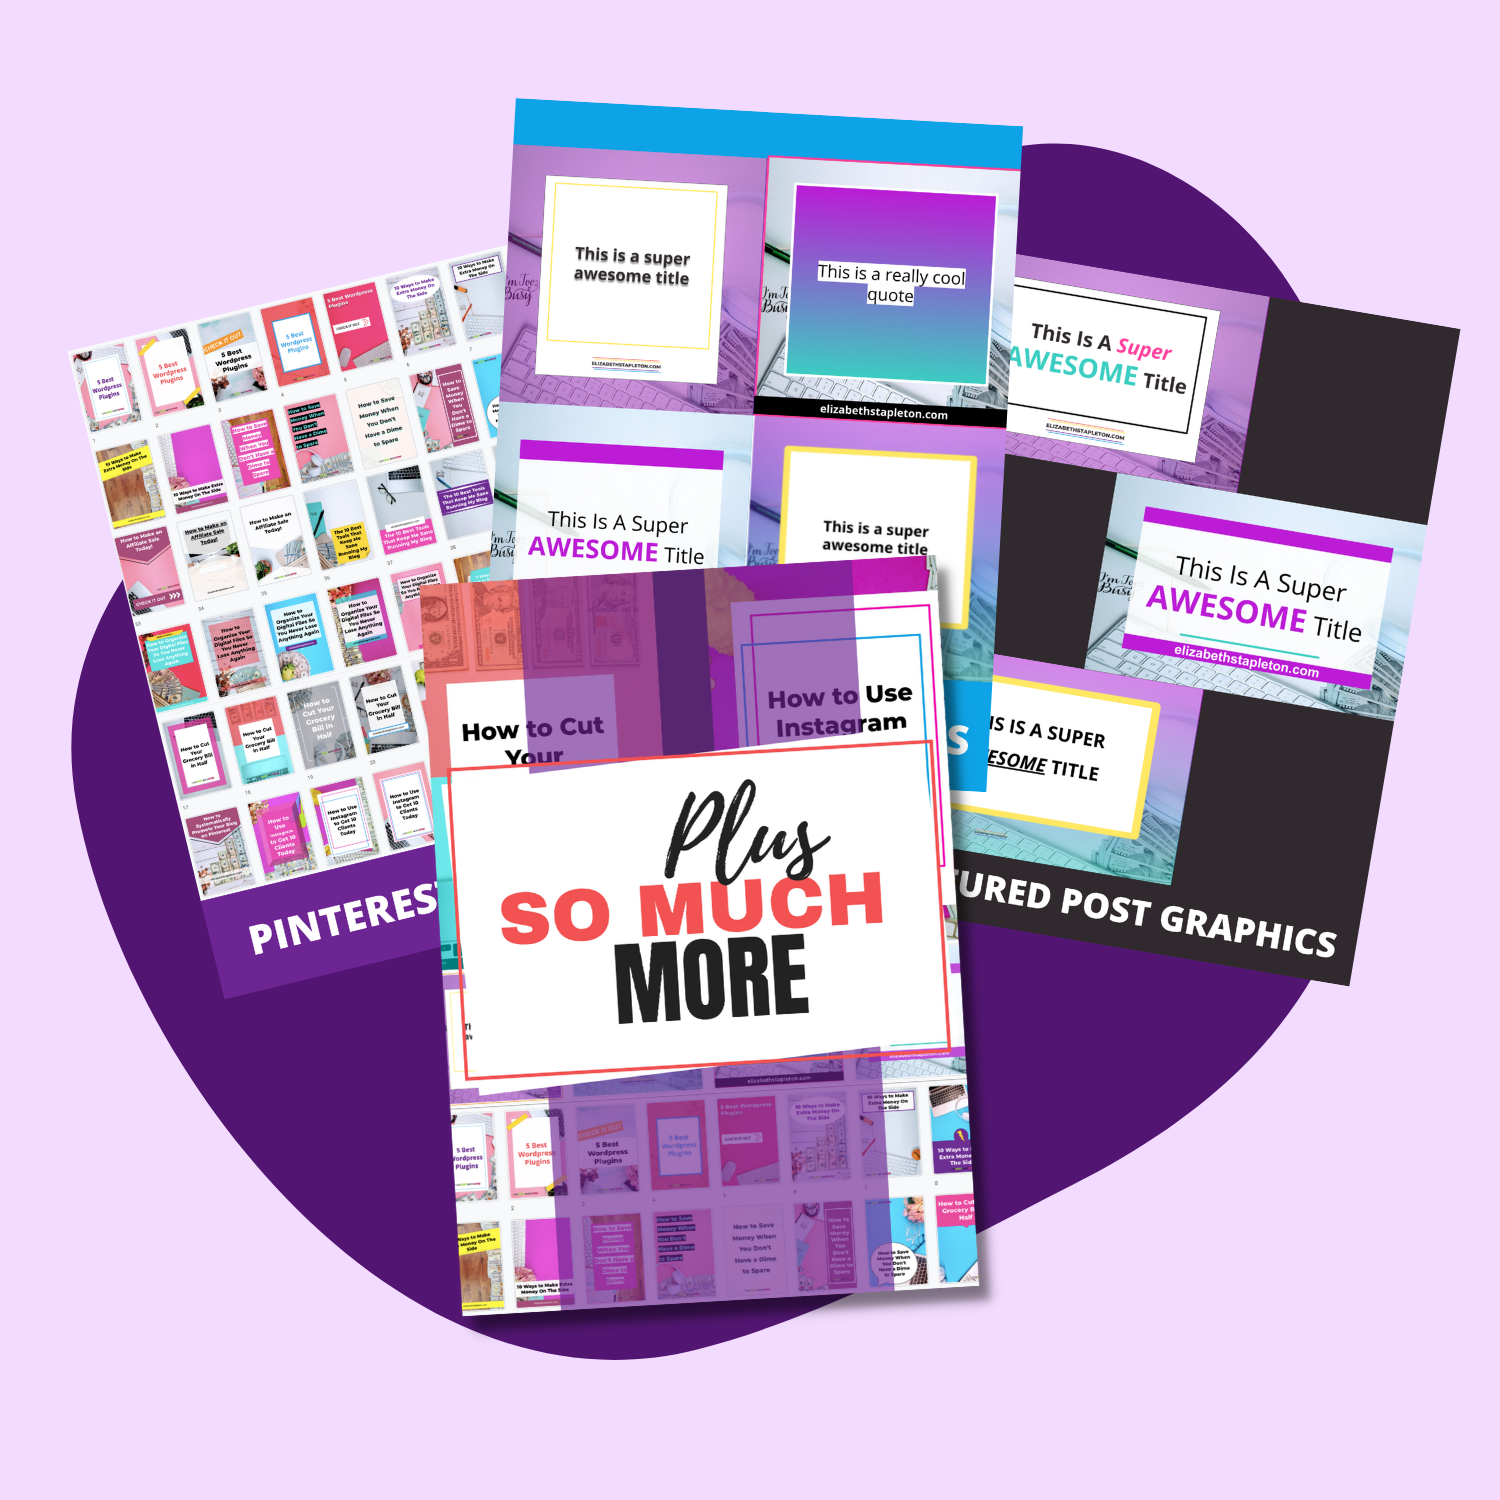 Play so much more Pin Generator in a Box e-book bundle.